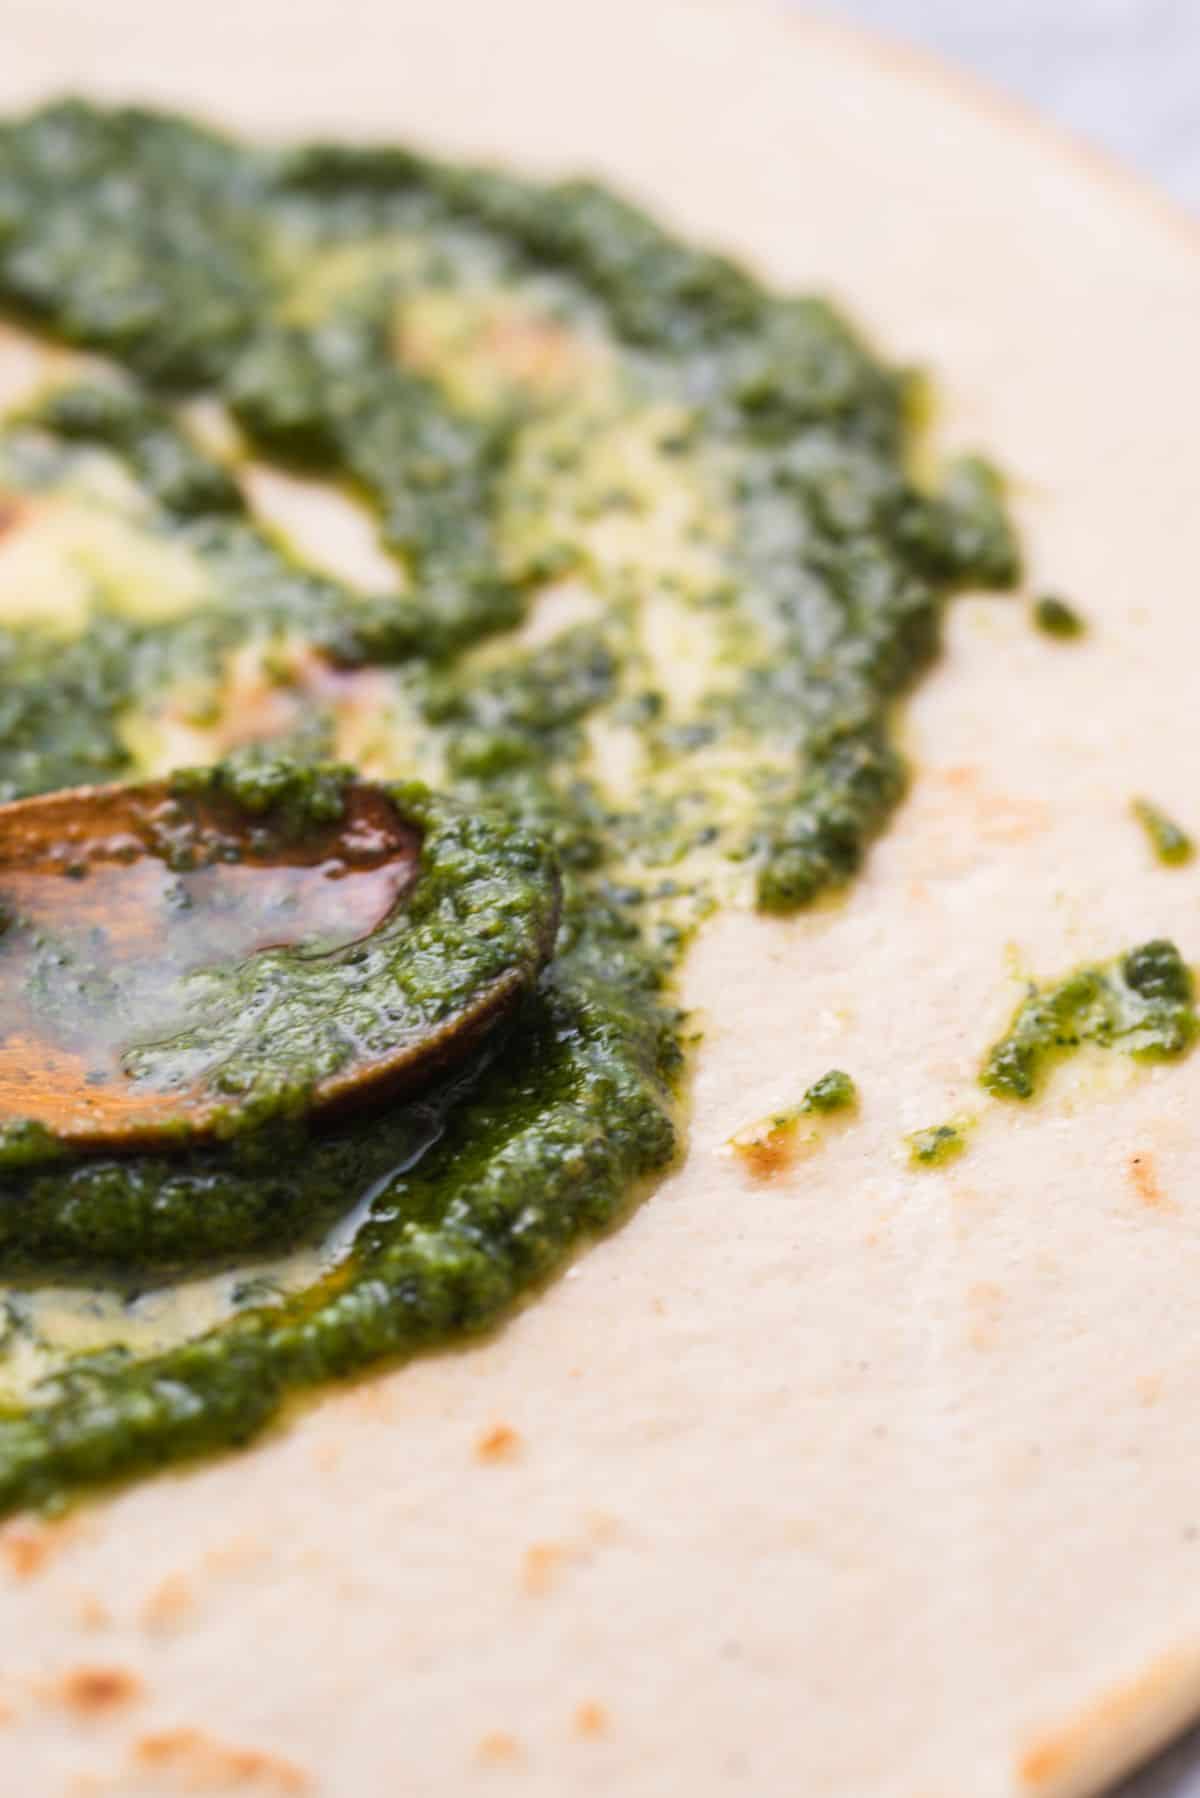 Pesto being spread with a spoon onto base of pizza